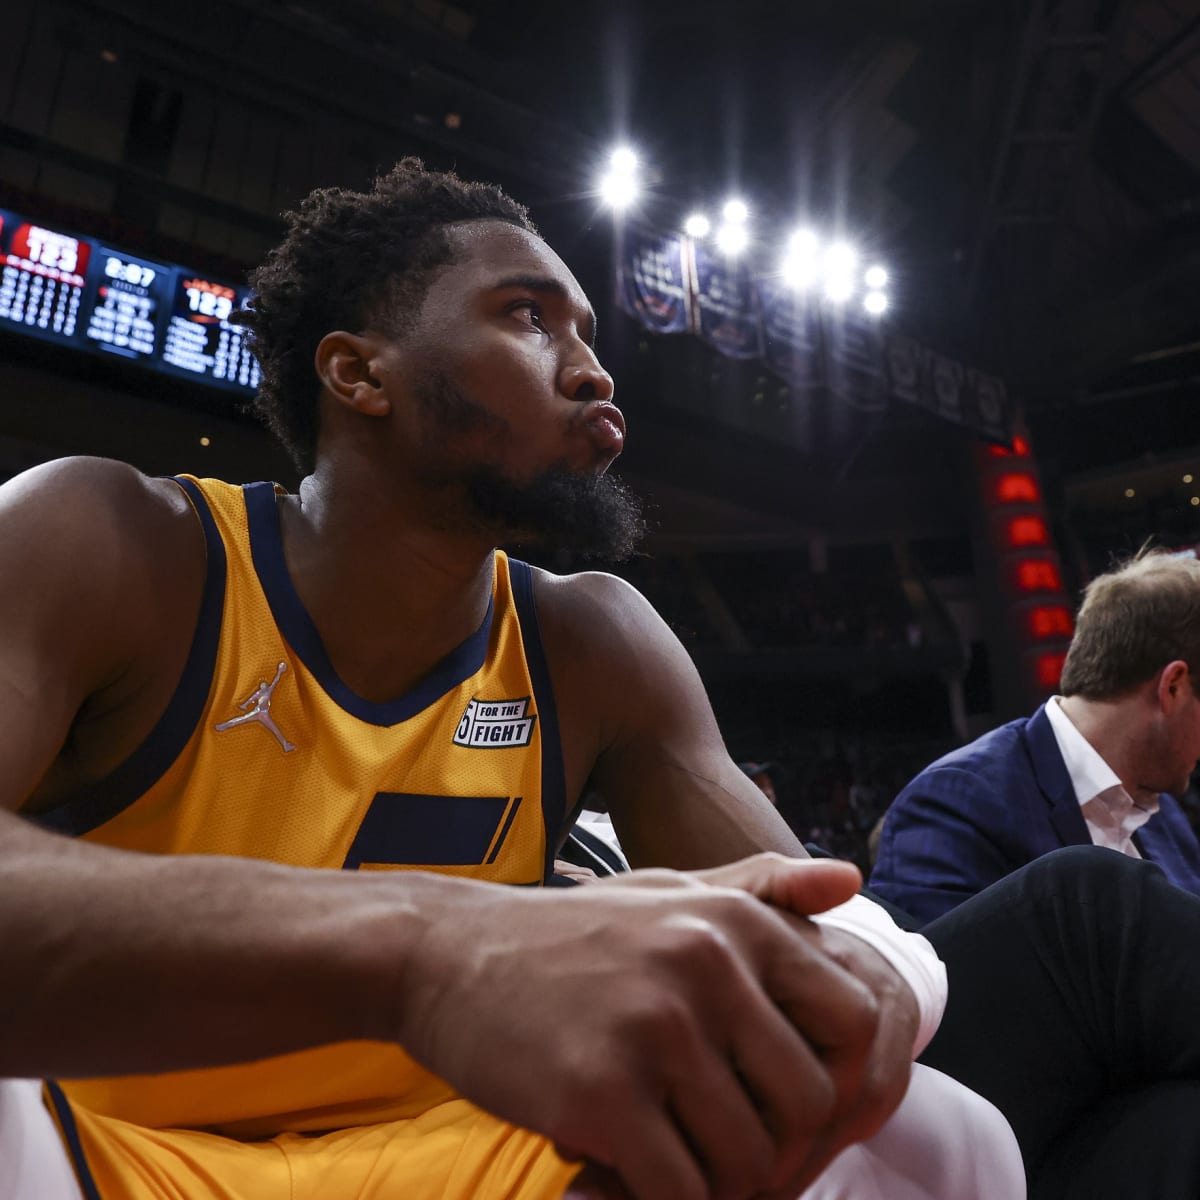 Two NBA stars and his sister helped Donovan Mitchell decide to make the  jump to the NBA